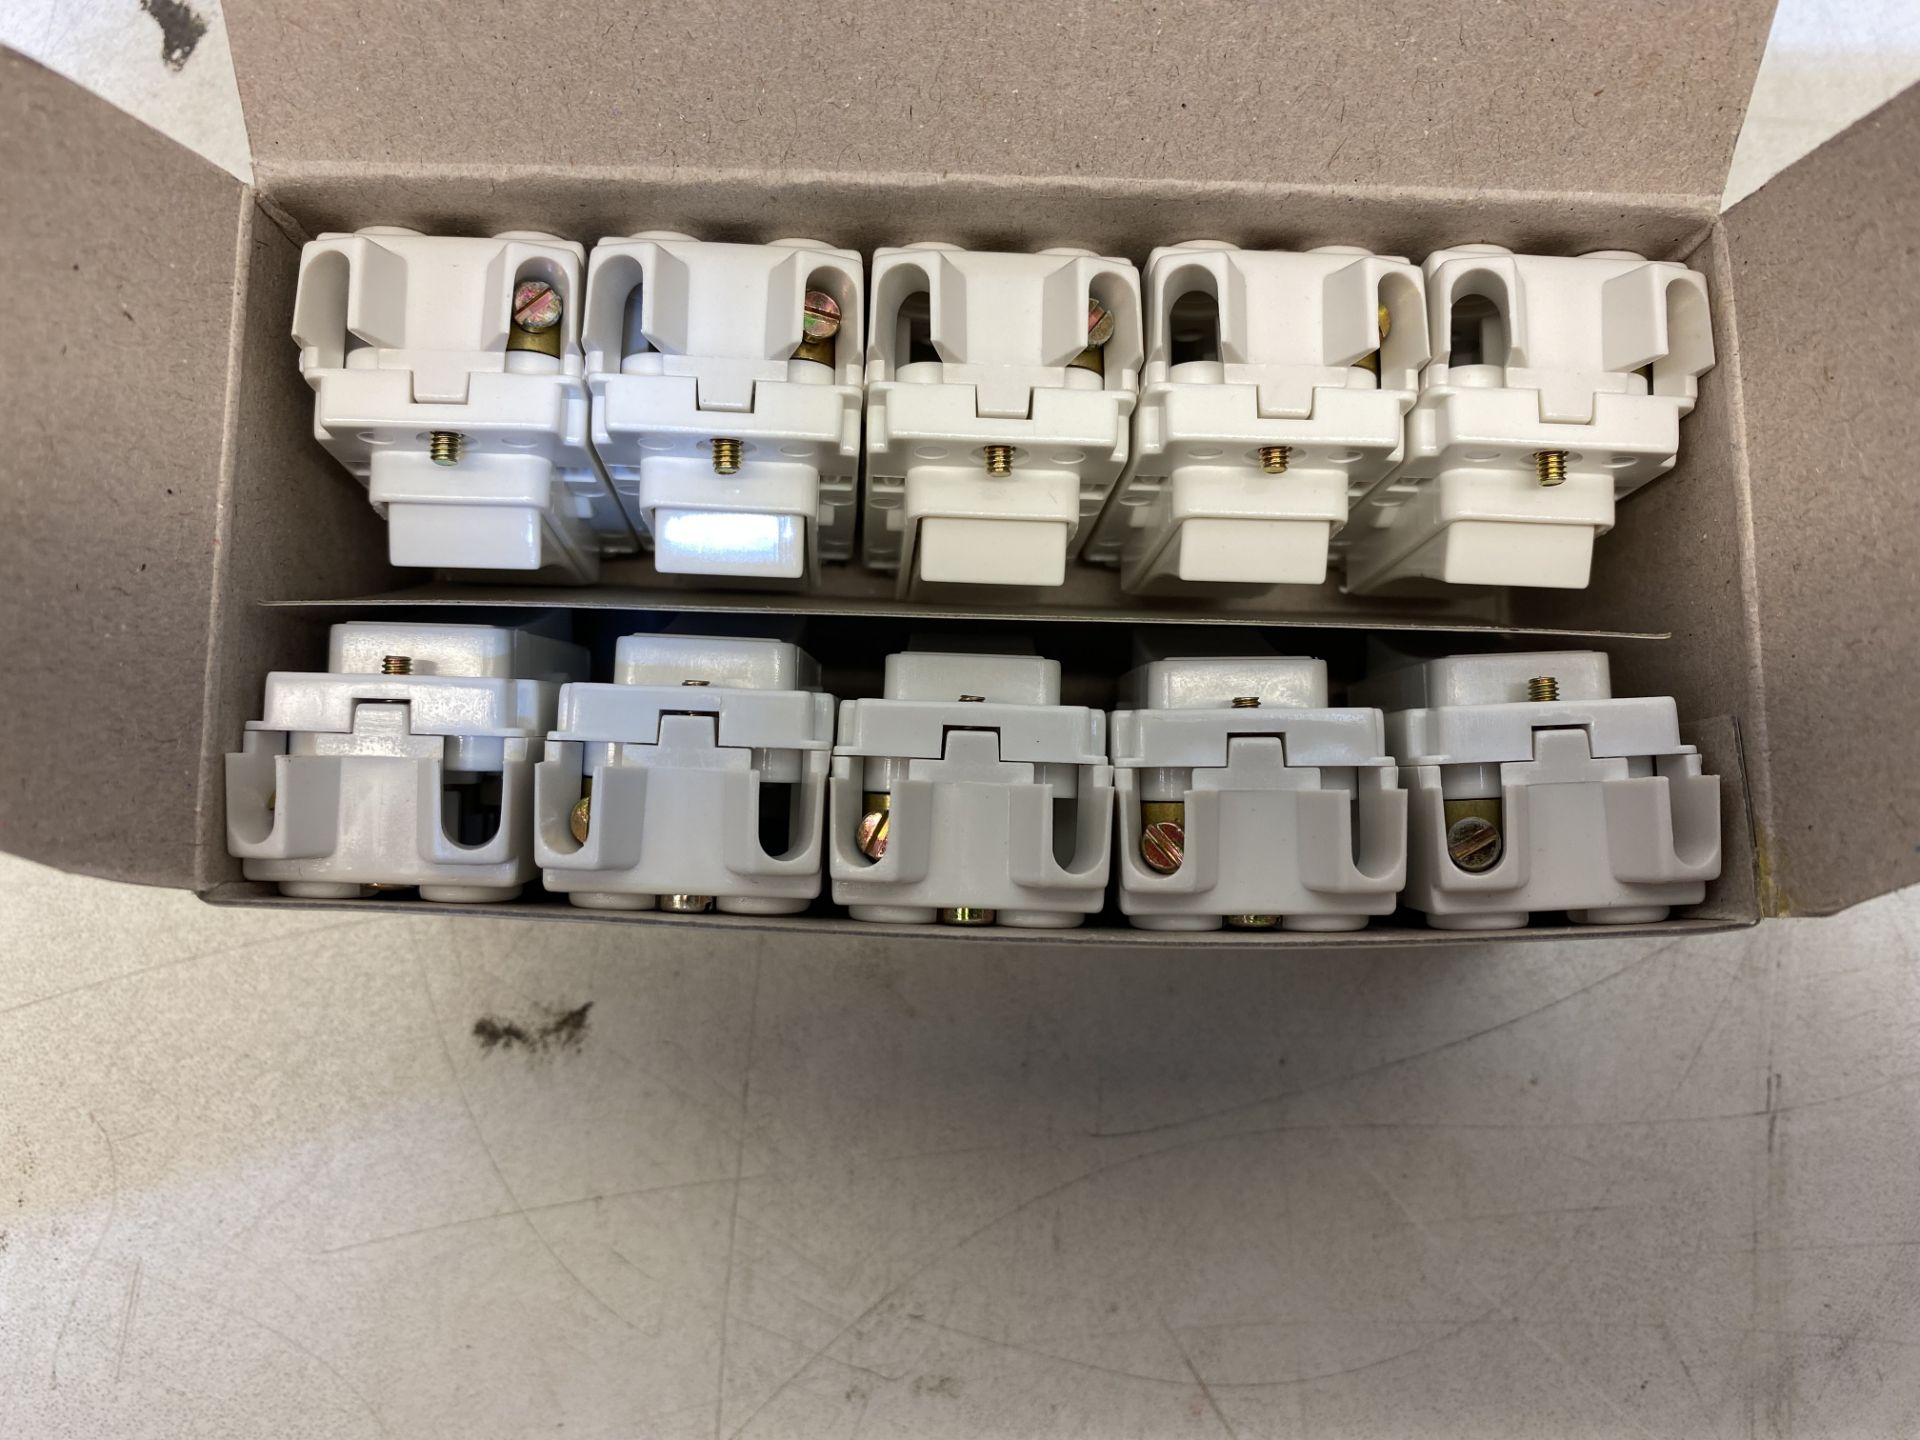 100 x Rockergrid AM4450 Anti Microbial 20AX 1 way Switches - Image 2 of 4